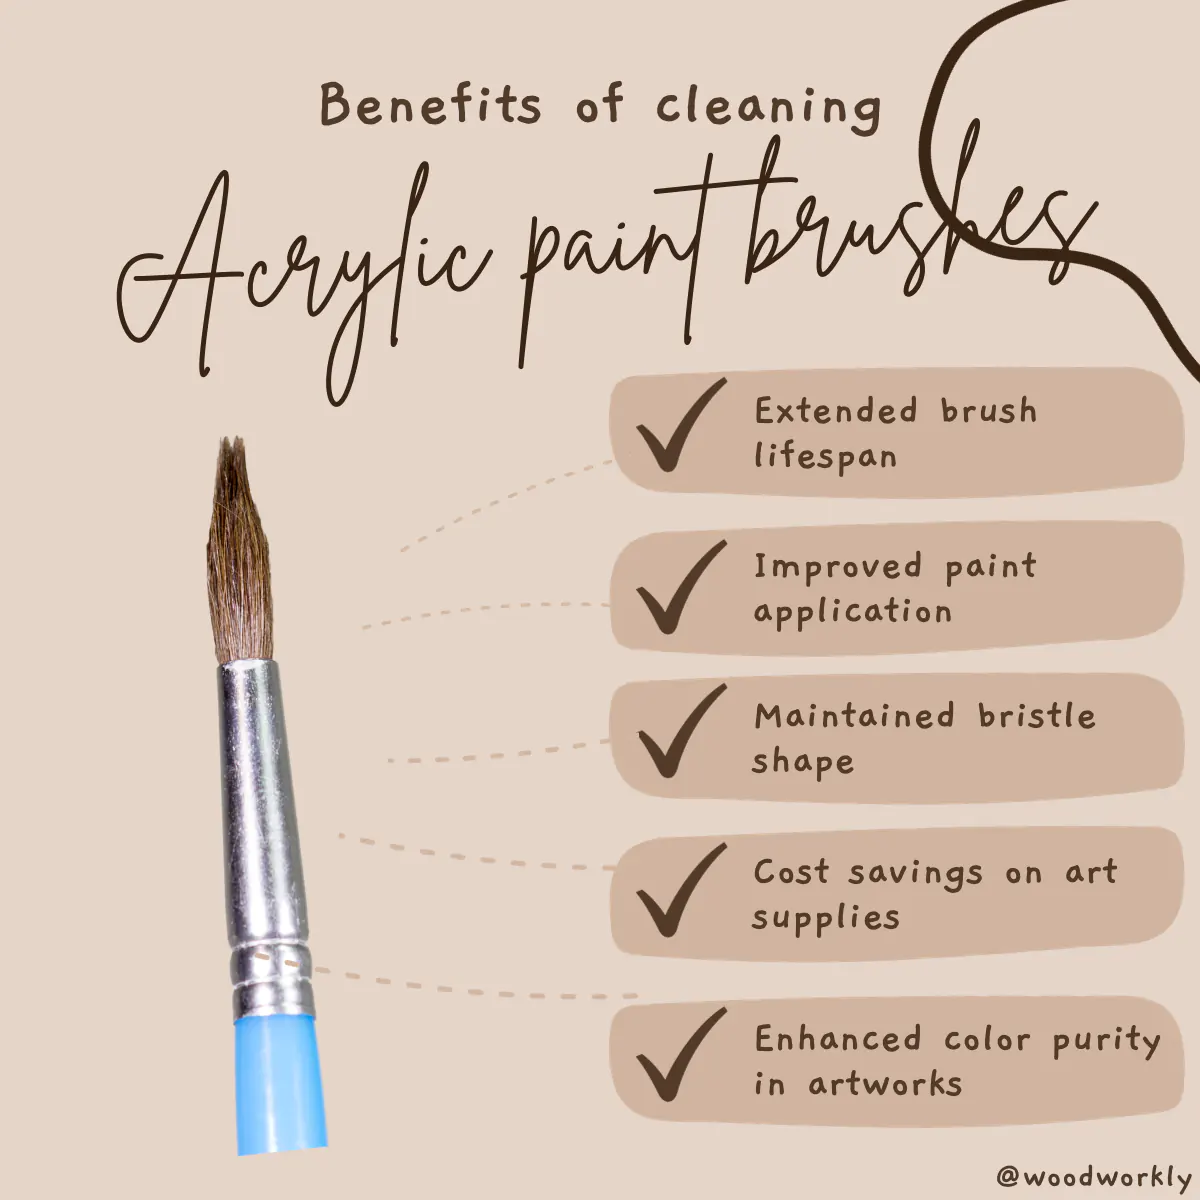 Benefits of cleaning Acrylic paint brushes